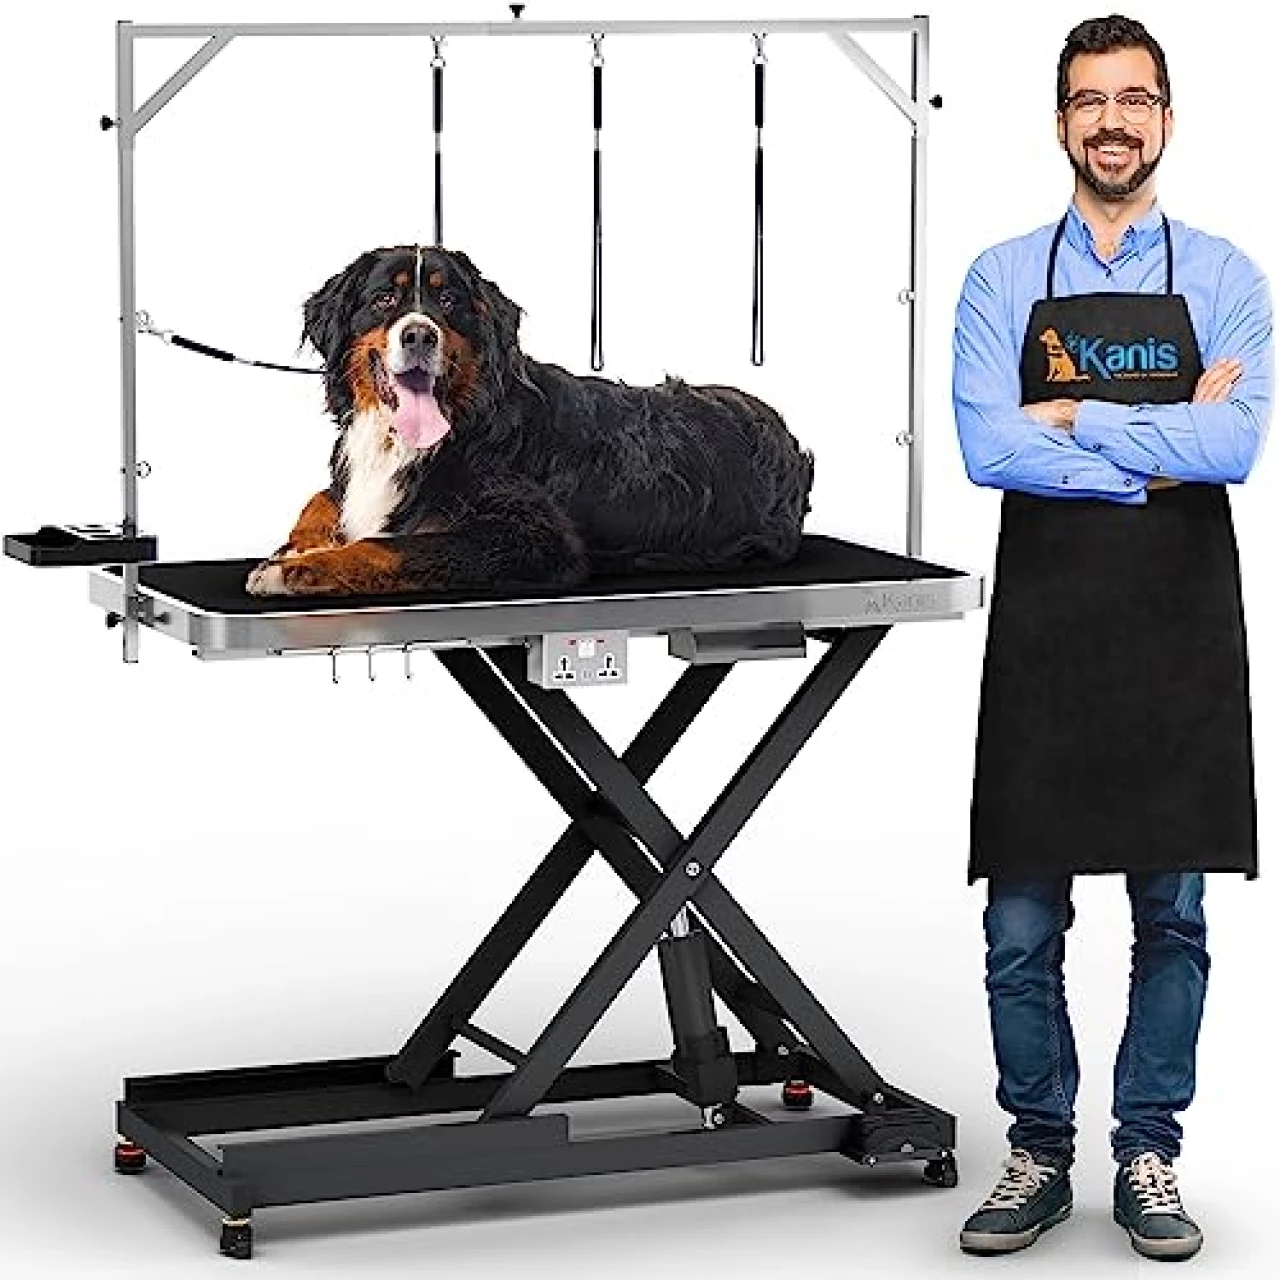 Professional Electric Dog Grooming Table - Heavy Duty, Height Adjustable Pet Grooming Table